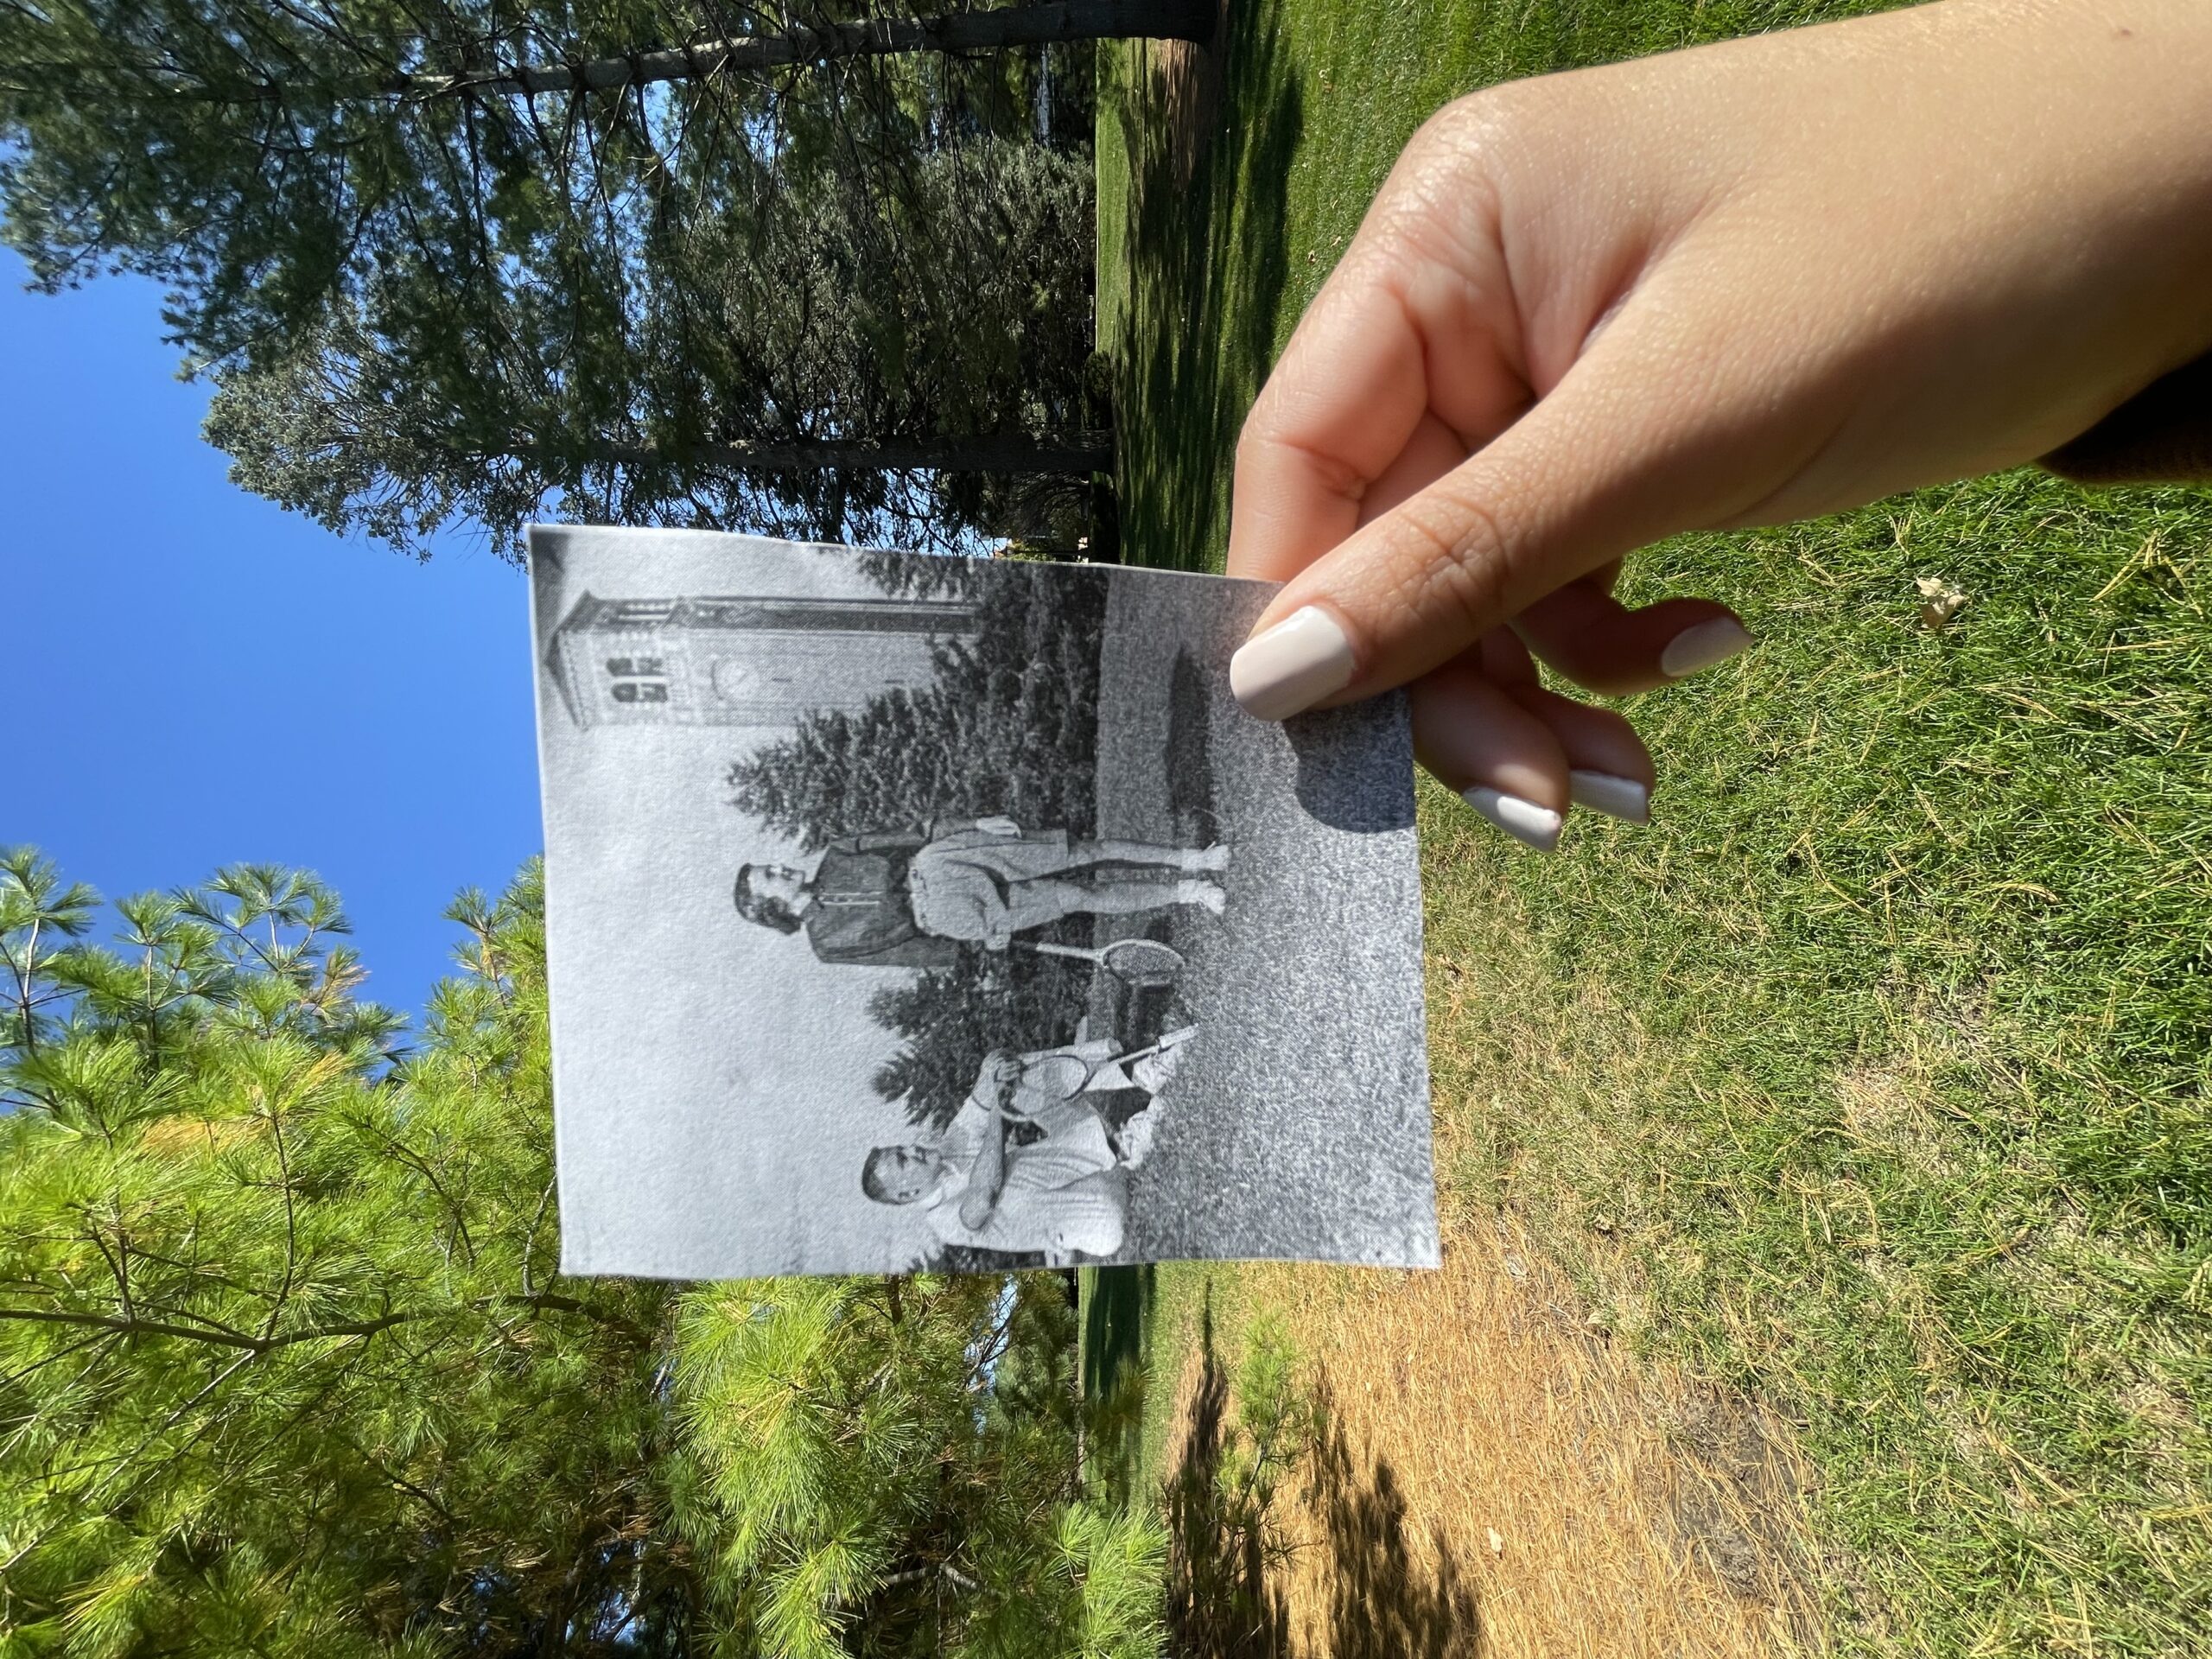 A hand holds a black and white photograph against the current location where the photo was taken.